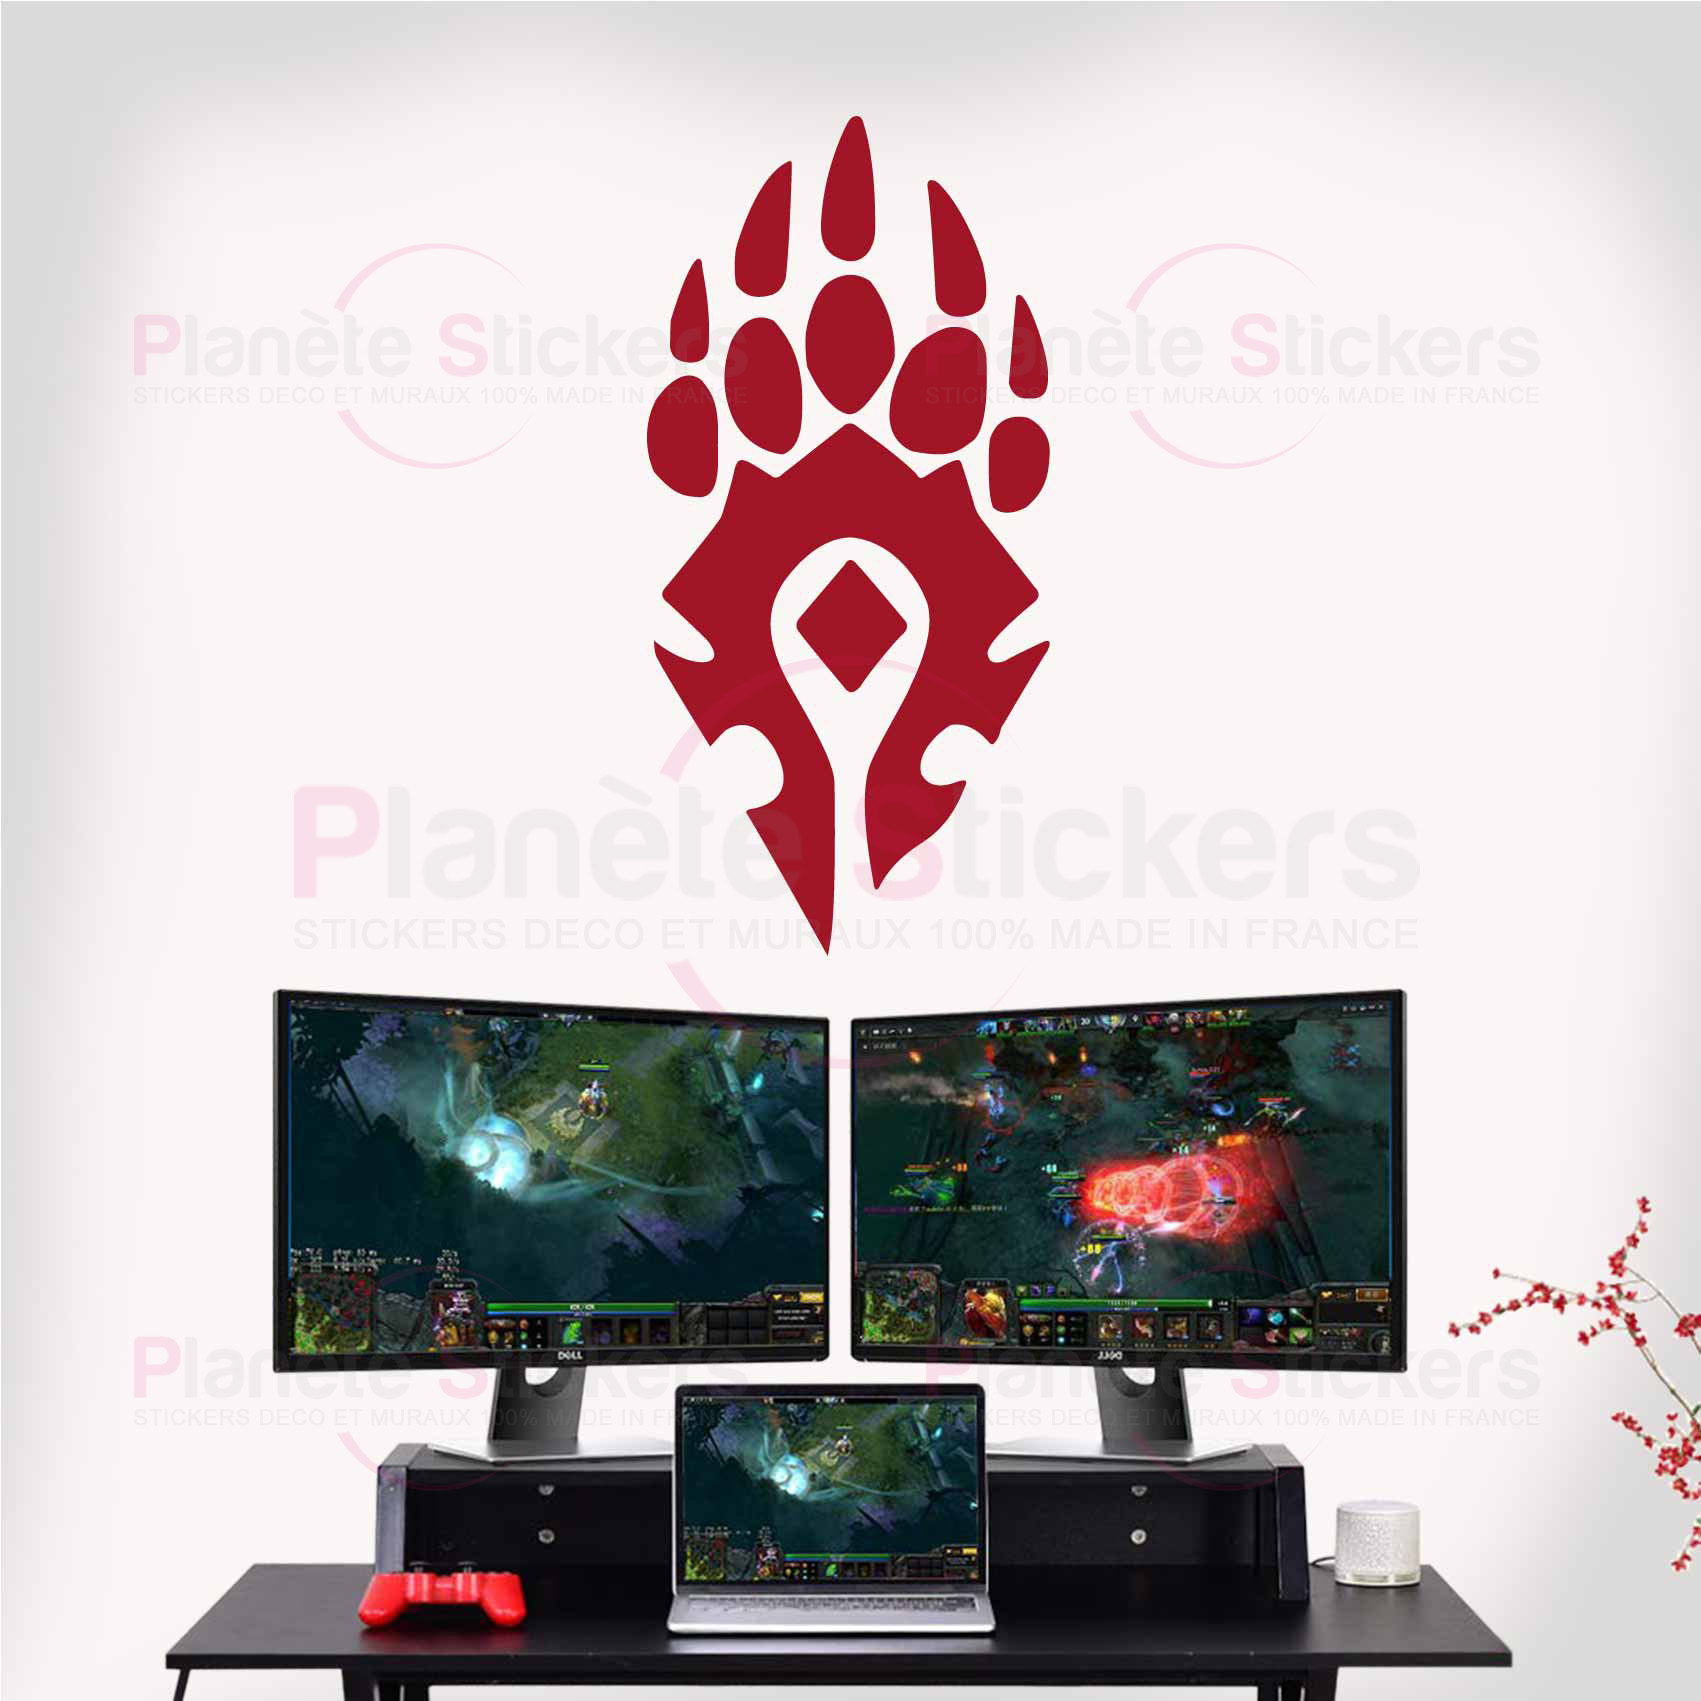 stickers-horde-druide-wow-ref9wow-stickers-muraux-world-of-warcraft-autocollant-mural-jeux-video-sticker-gamer-deco-gaming-salon-chambre